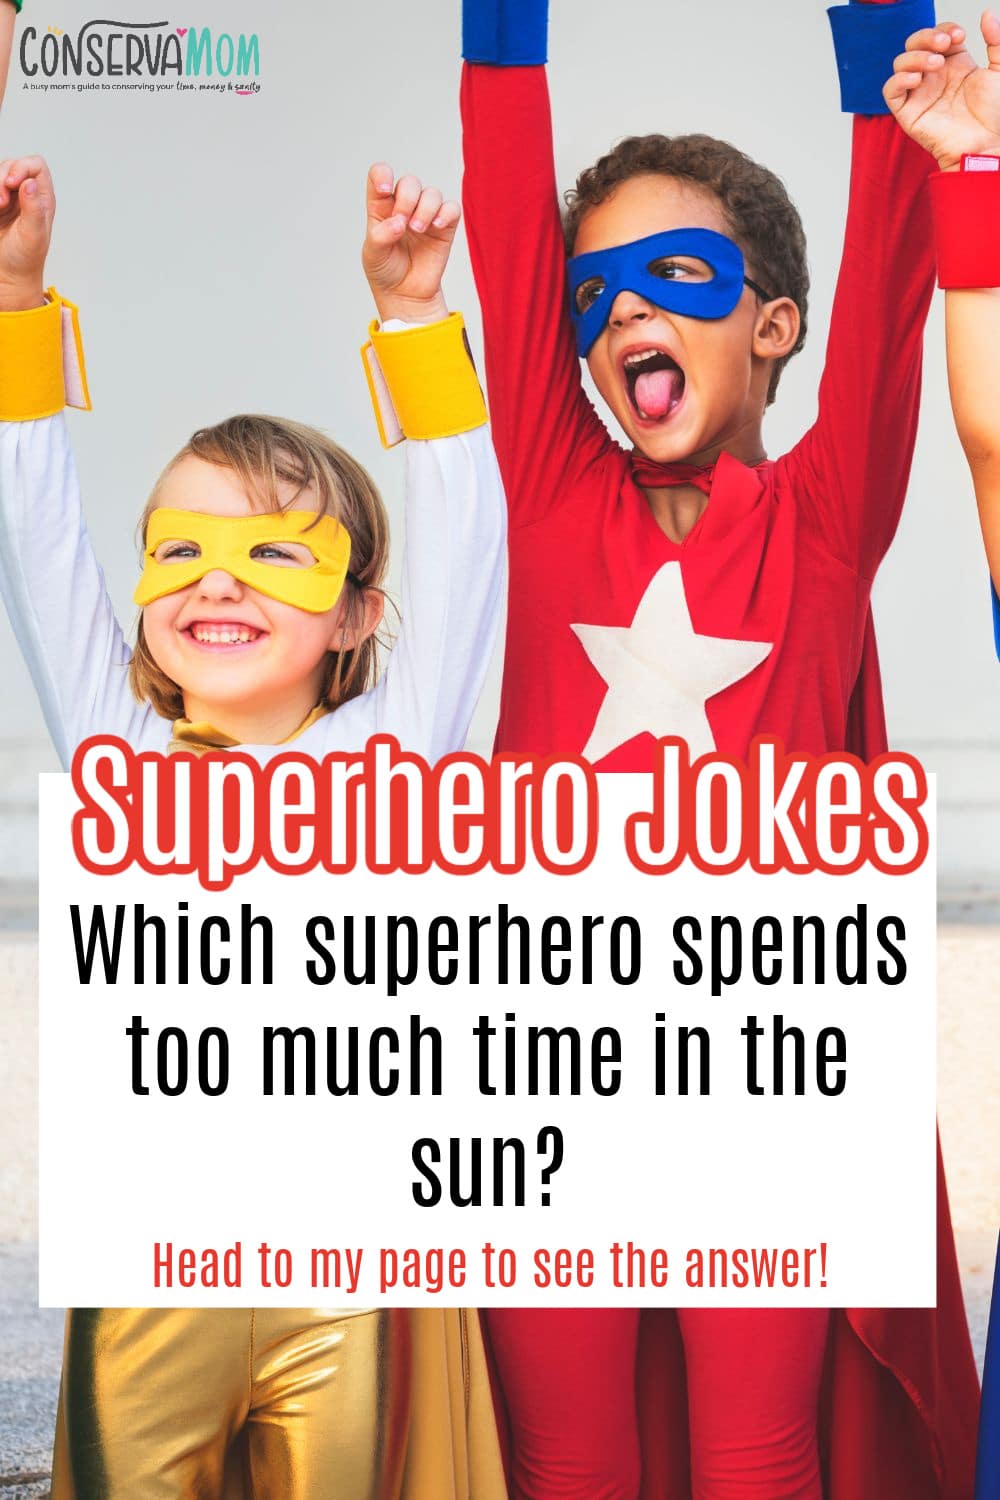 Check out these fun Superhero jokes that will be a blast to share!